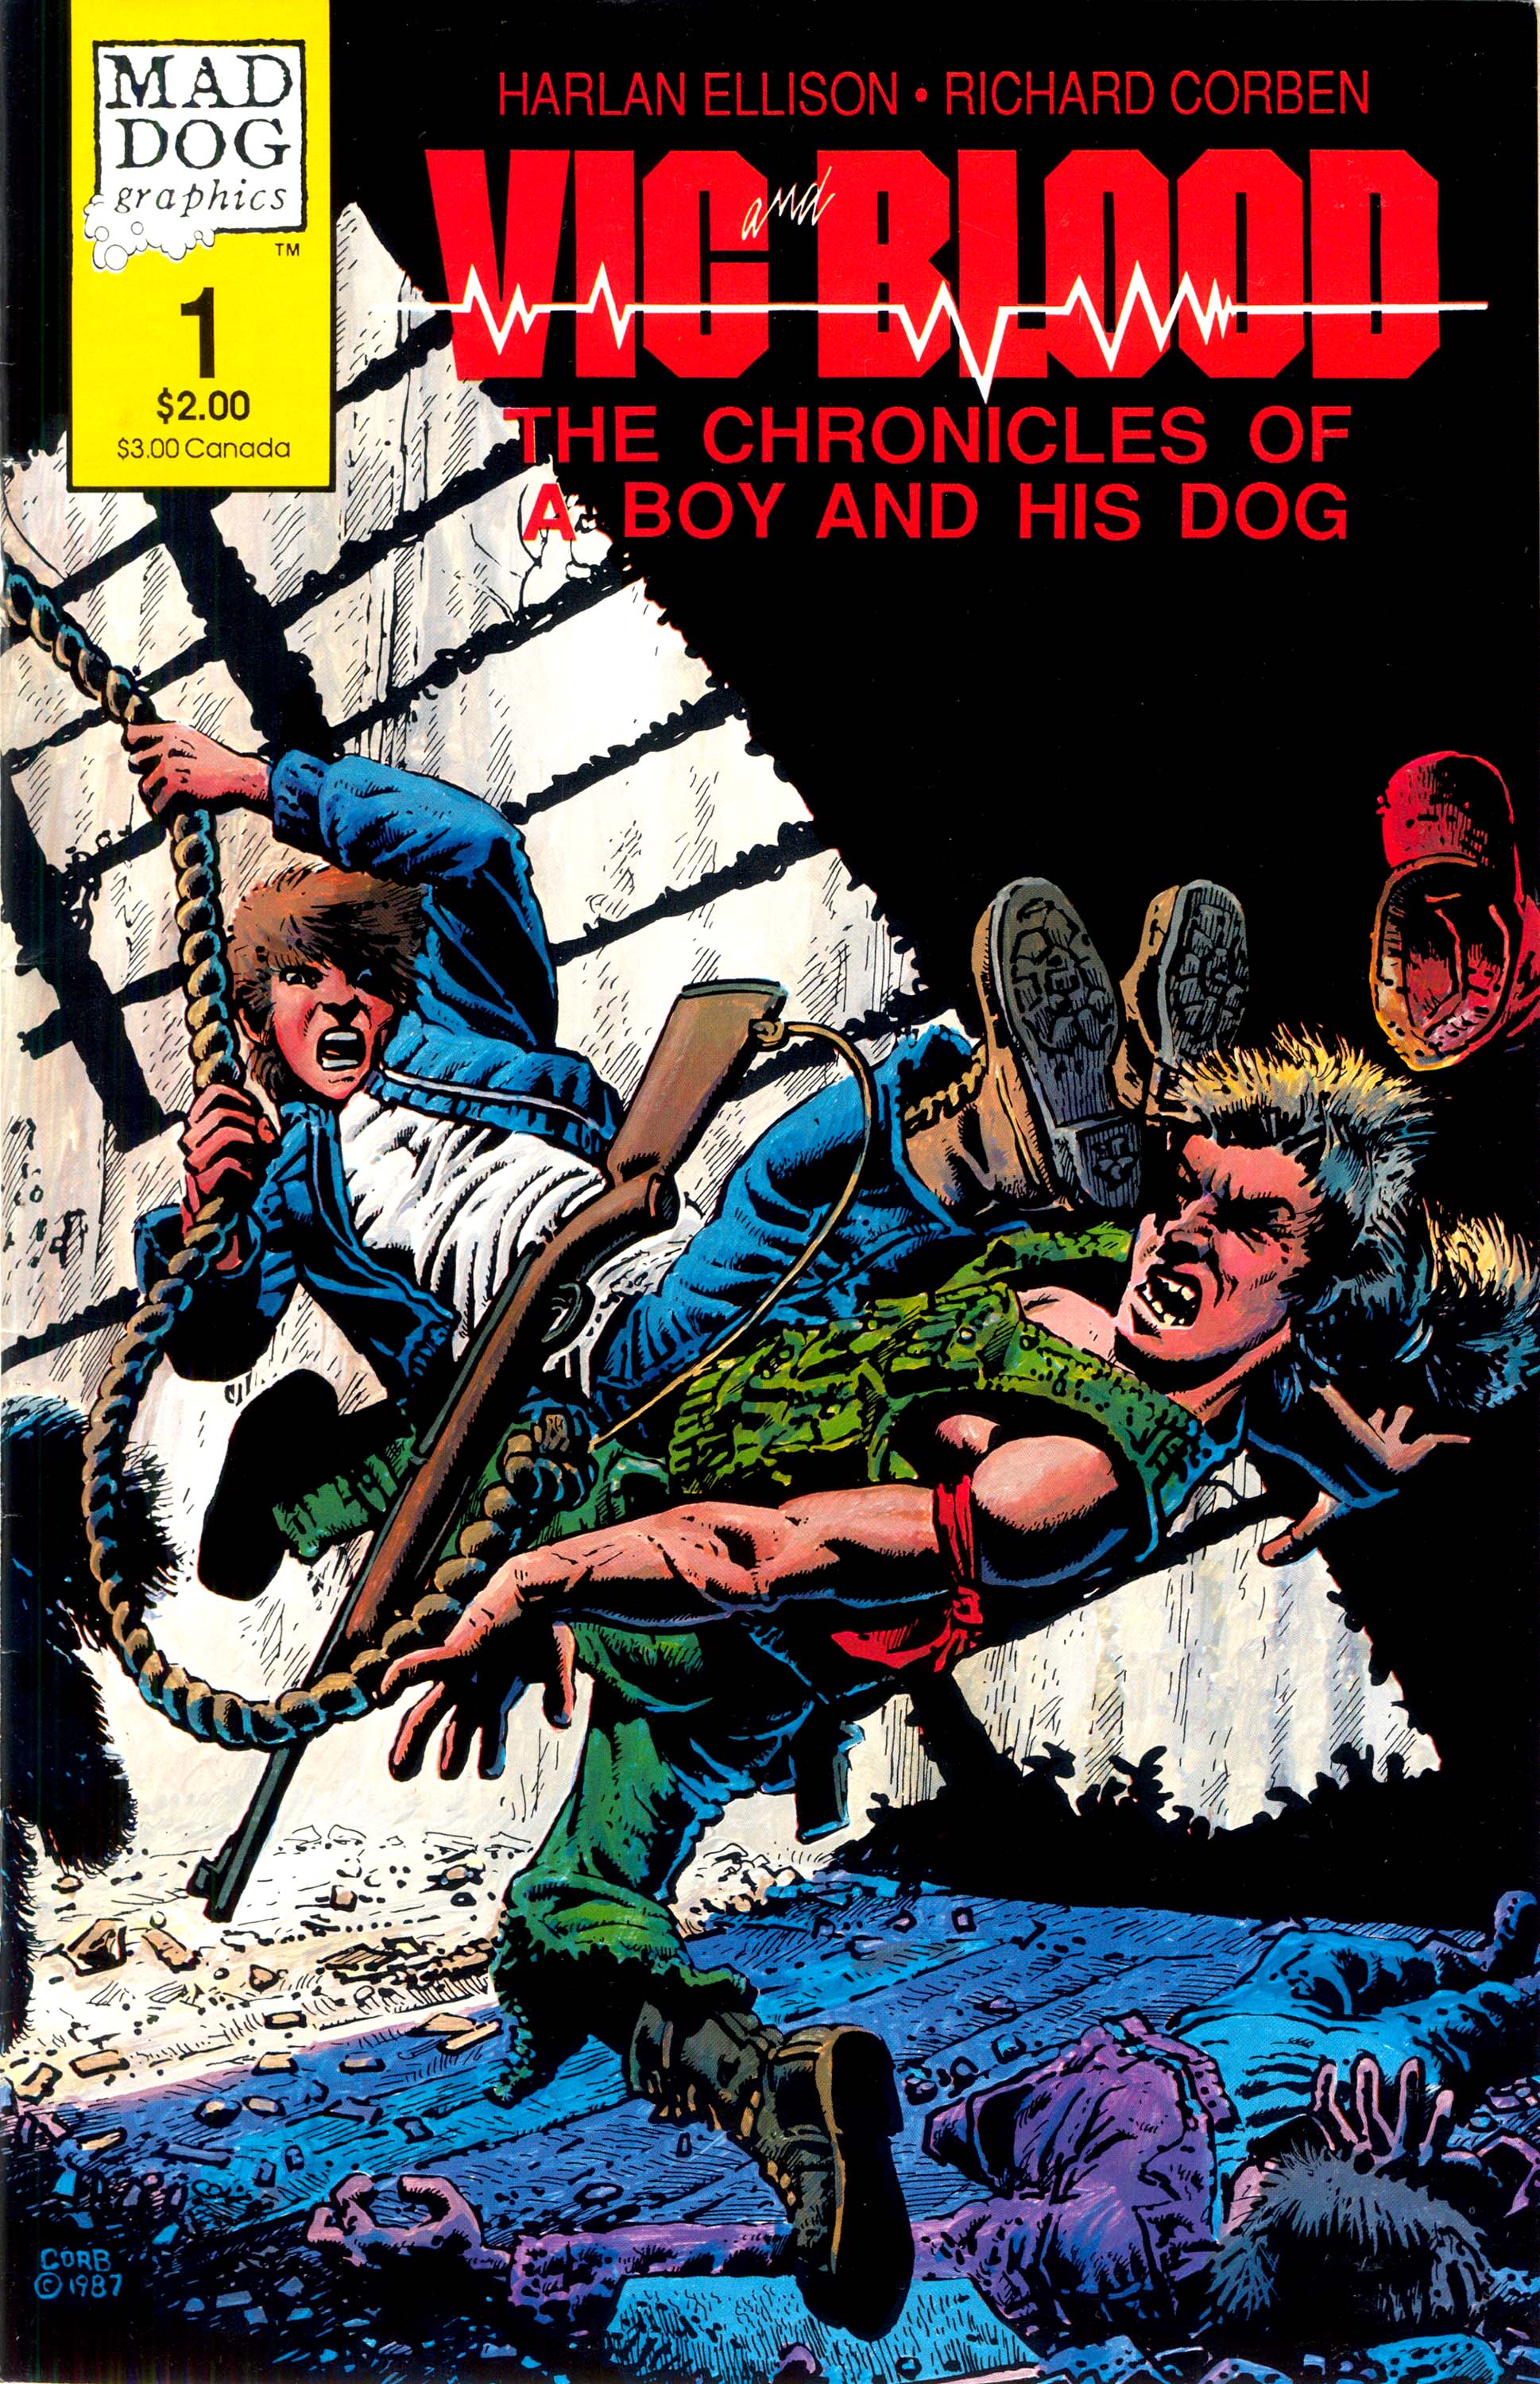 Vic and Blood #1, cover, art by Richard Corben